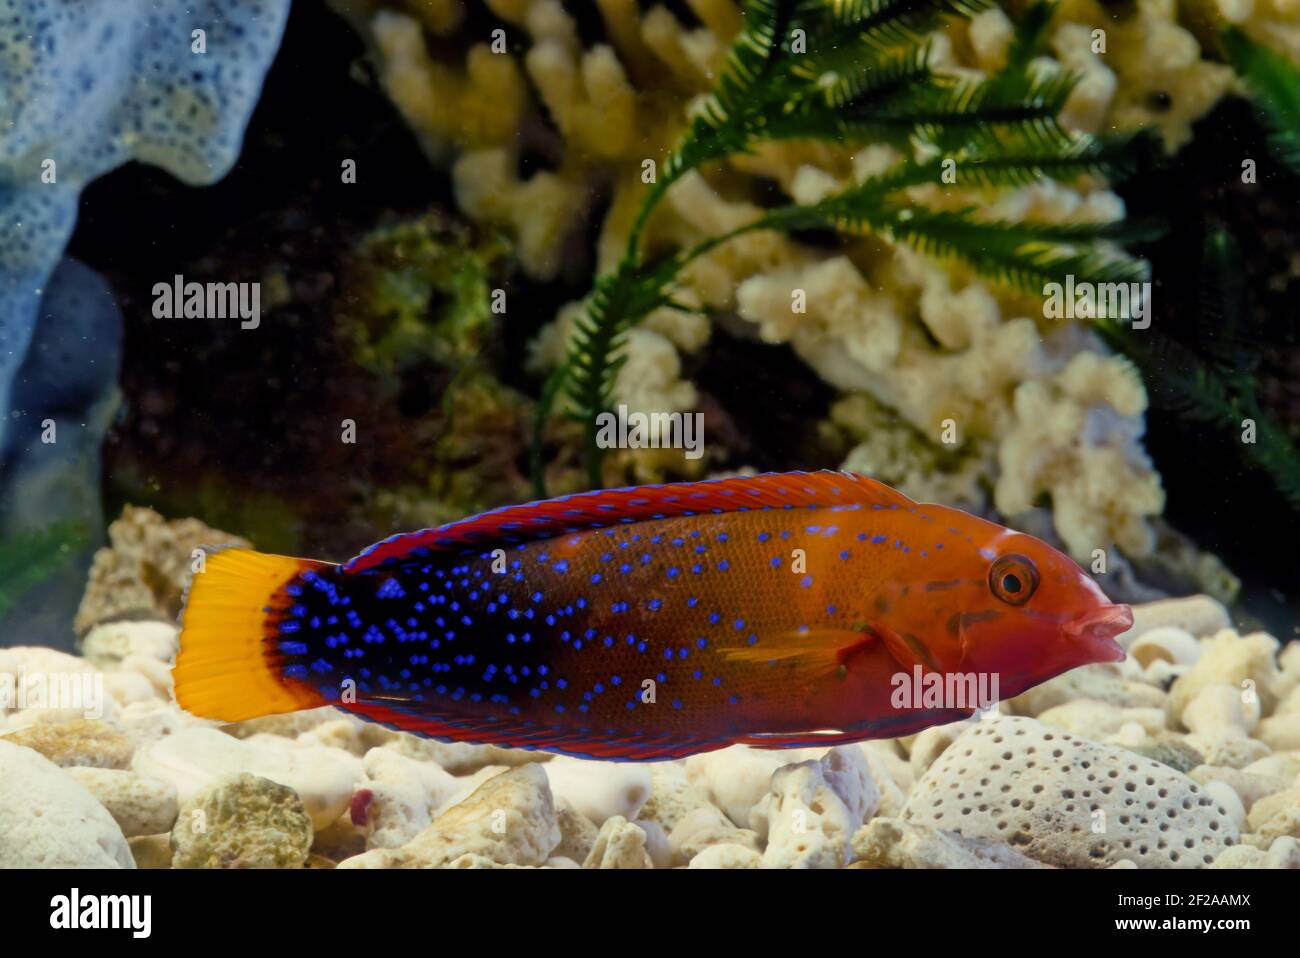 Coris gaimard, the yellowtail wrasse or African coris, among other vernacular names, is a species of wrasse native to the tropical waters of the centr Stock Photo